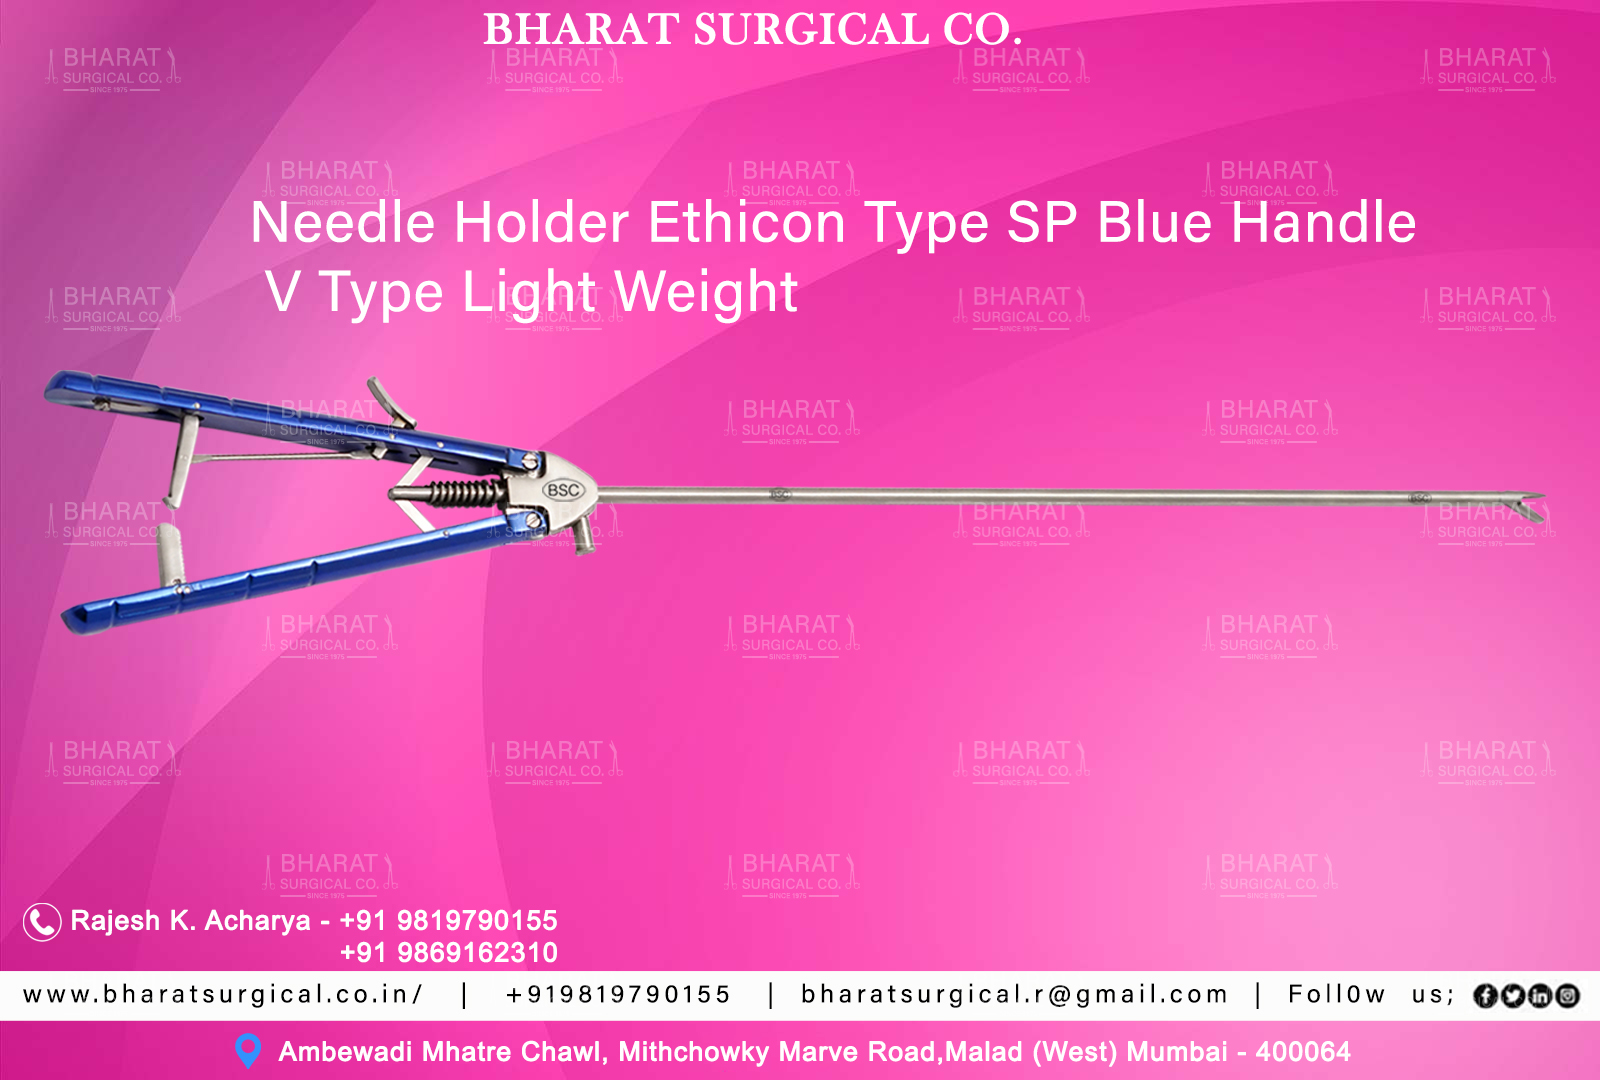 Needle Holder Ethicon Type SP Blue Handle Manufacturers & Suppliers 